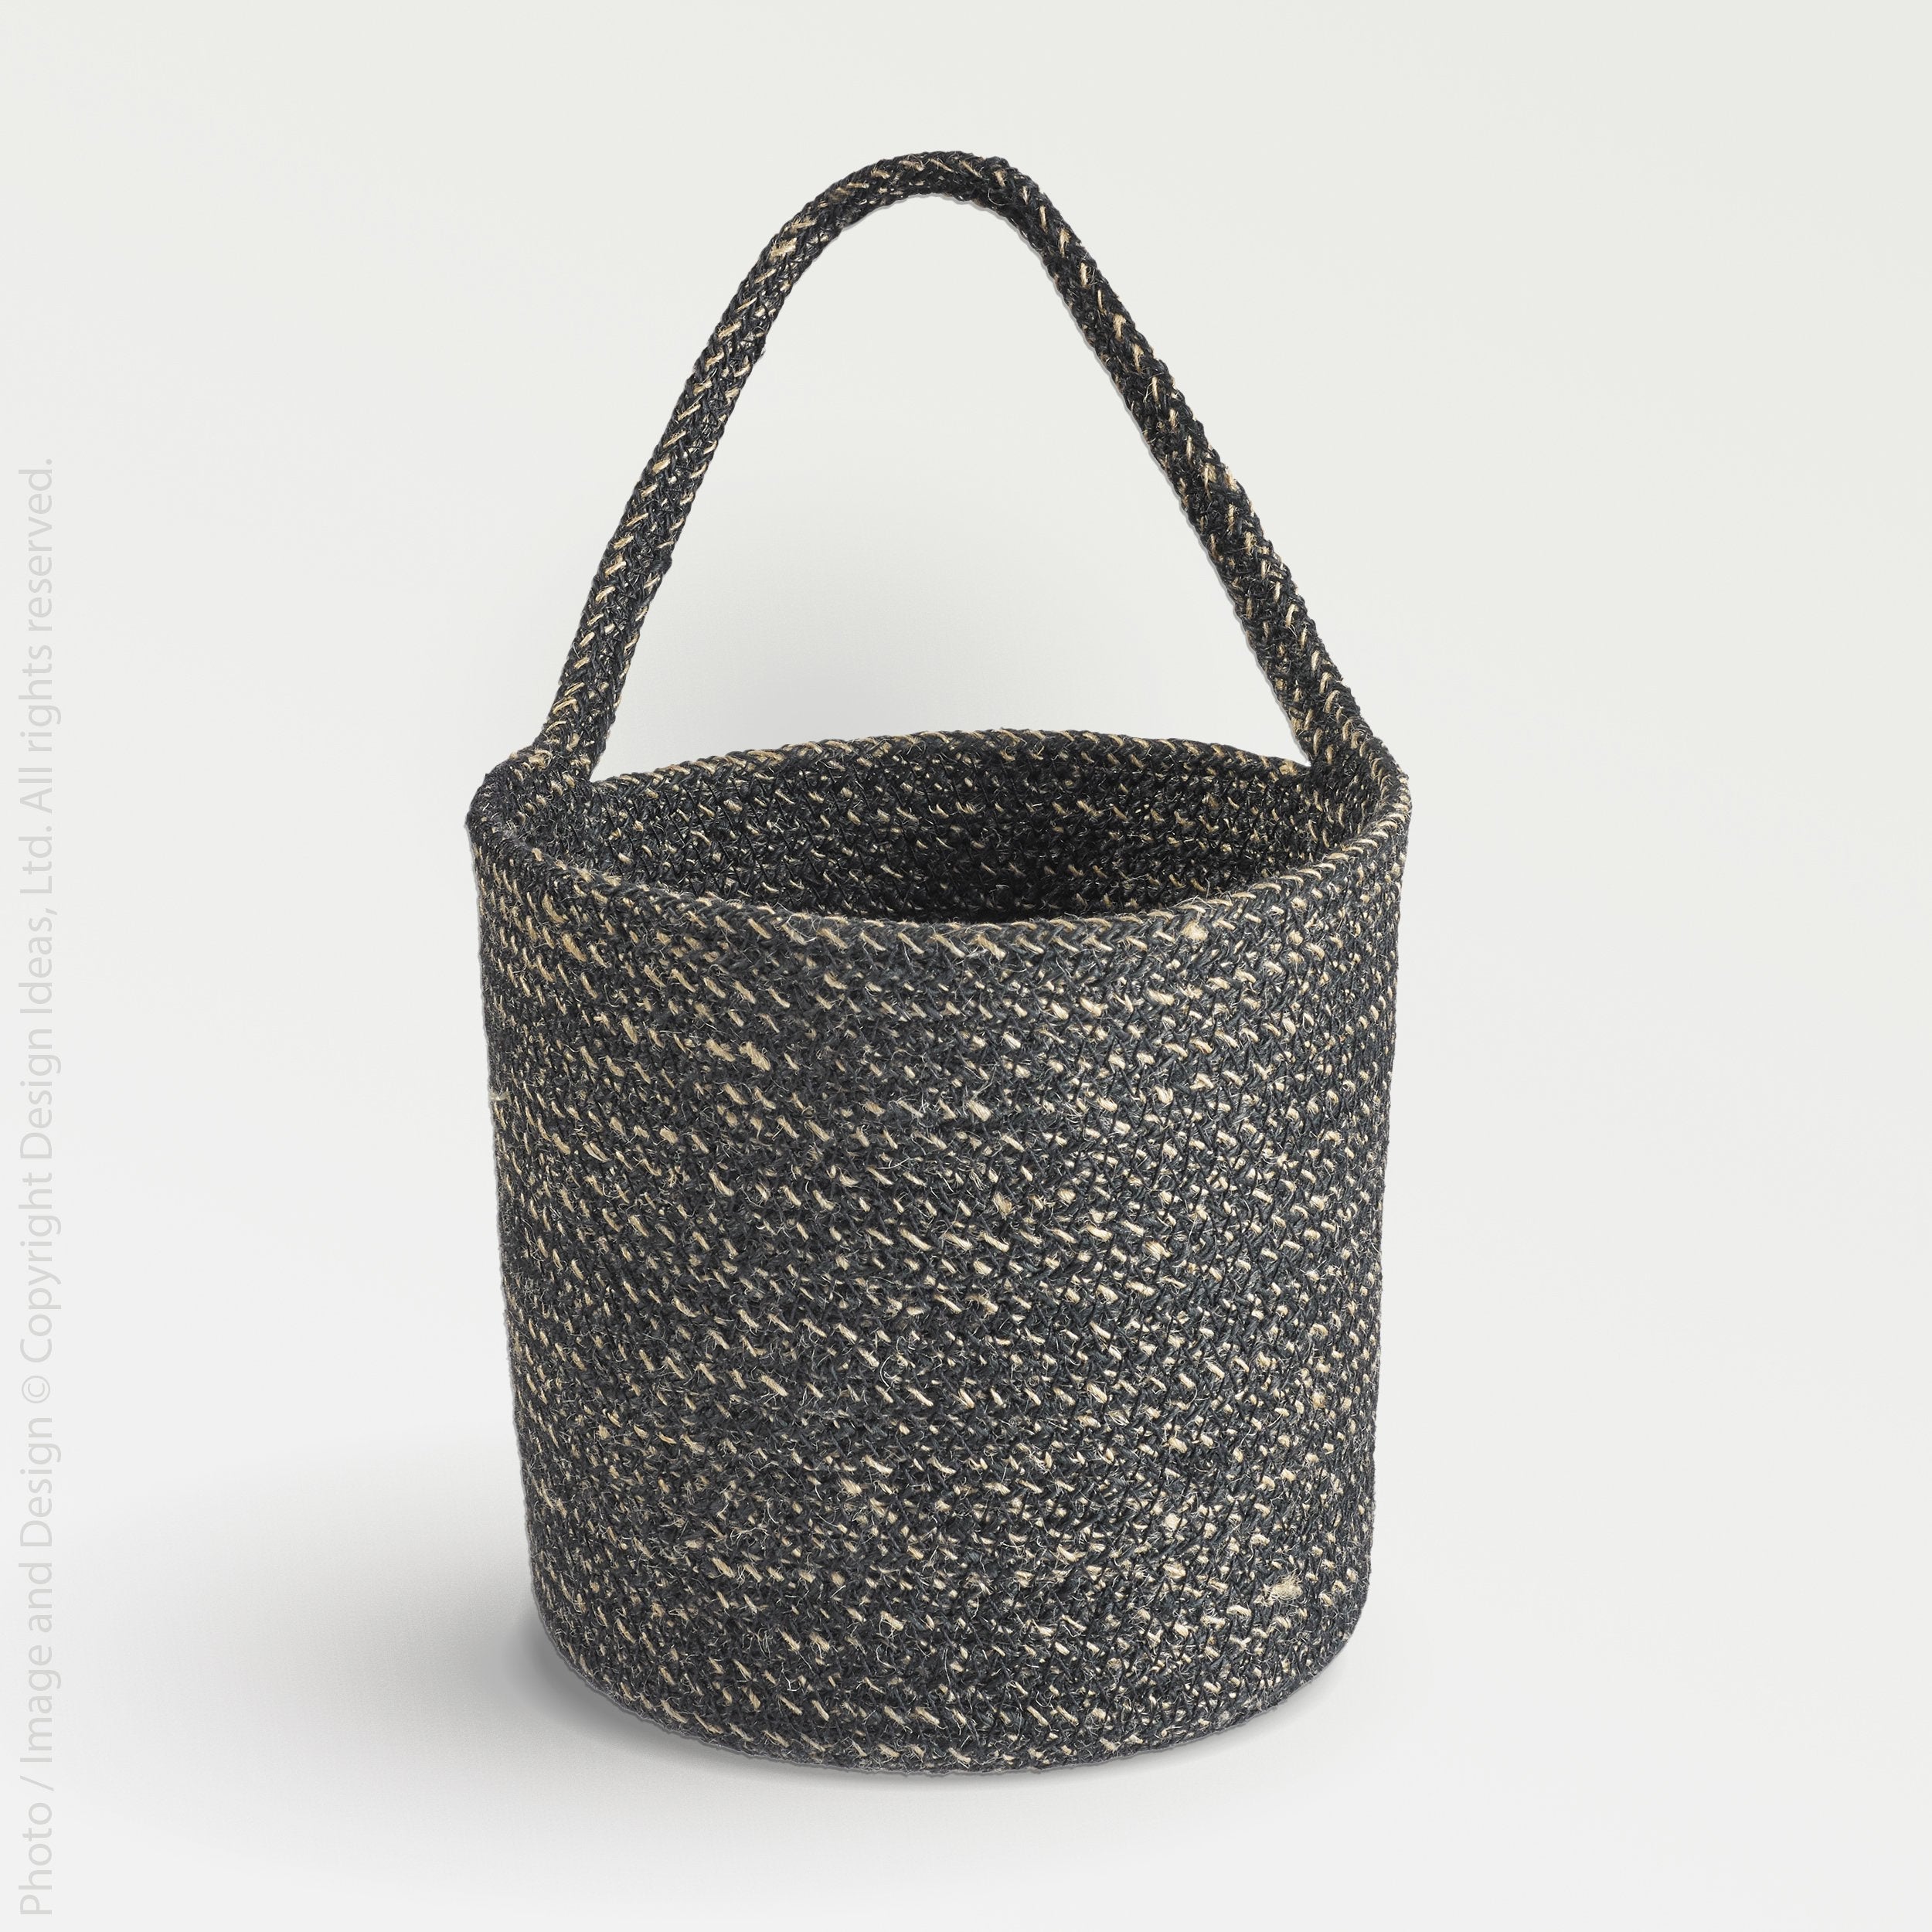 Melia™ hanging basket (6.3 x 7 x 6.5 in.) - Black | Image 6 | Premium Basket from the Melia collection | made with Jute for long lasting use | texxture